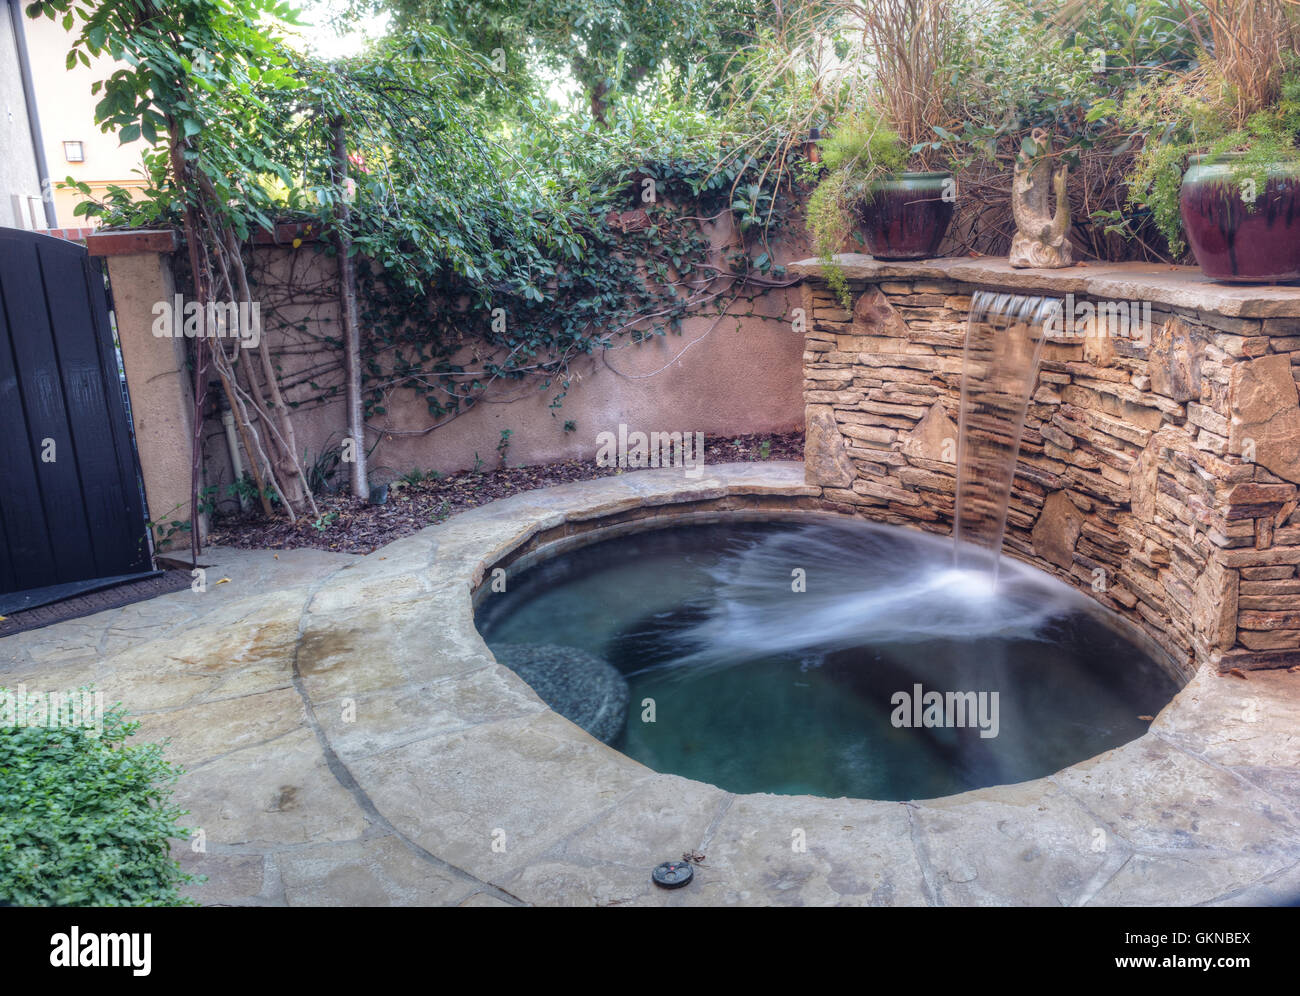 Irvine, CA, USA – August 19, 2016: Oval hot tub spa with waterfall and feng shui garden decor located in a private small patio w Stock Photo